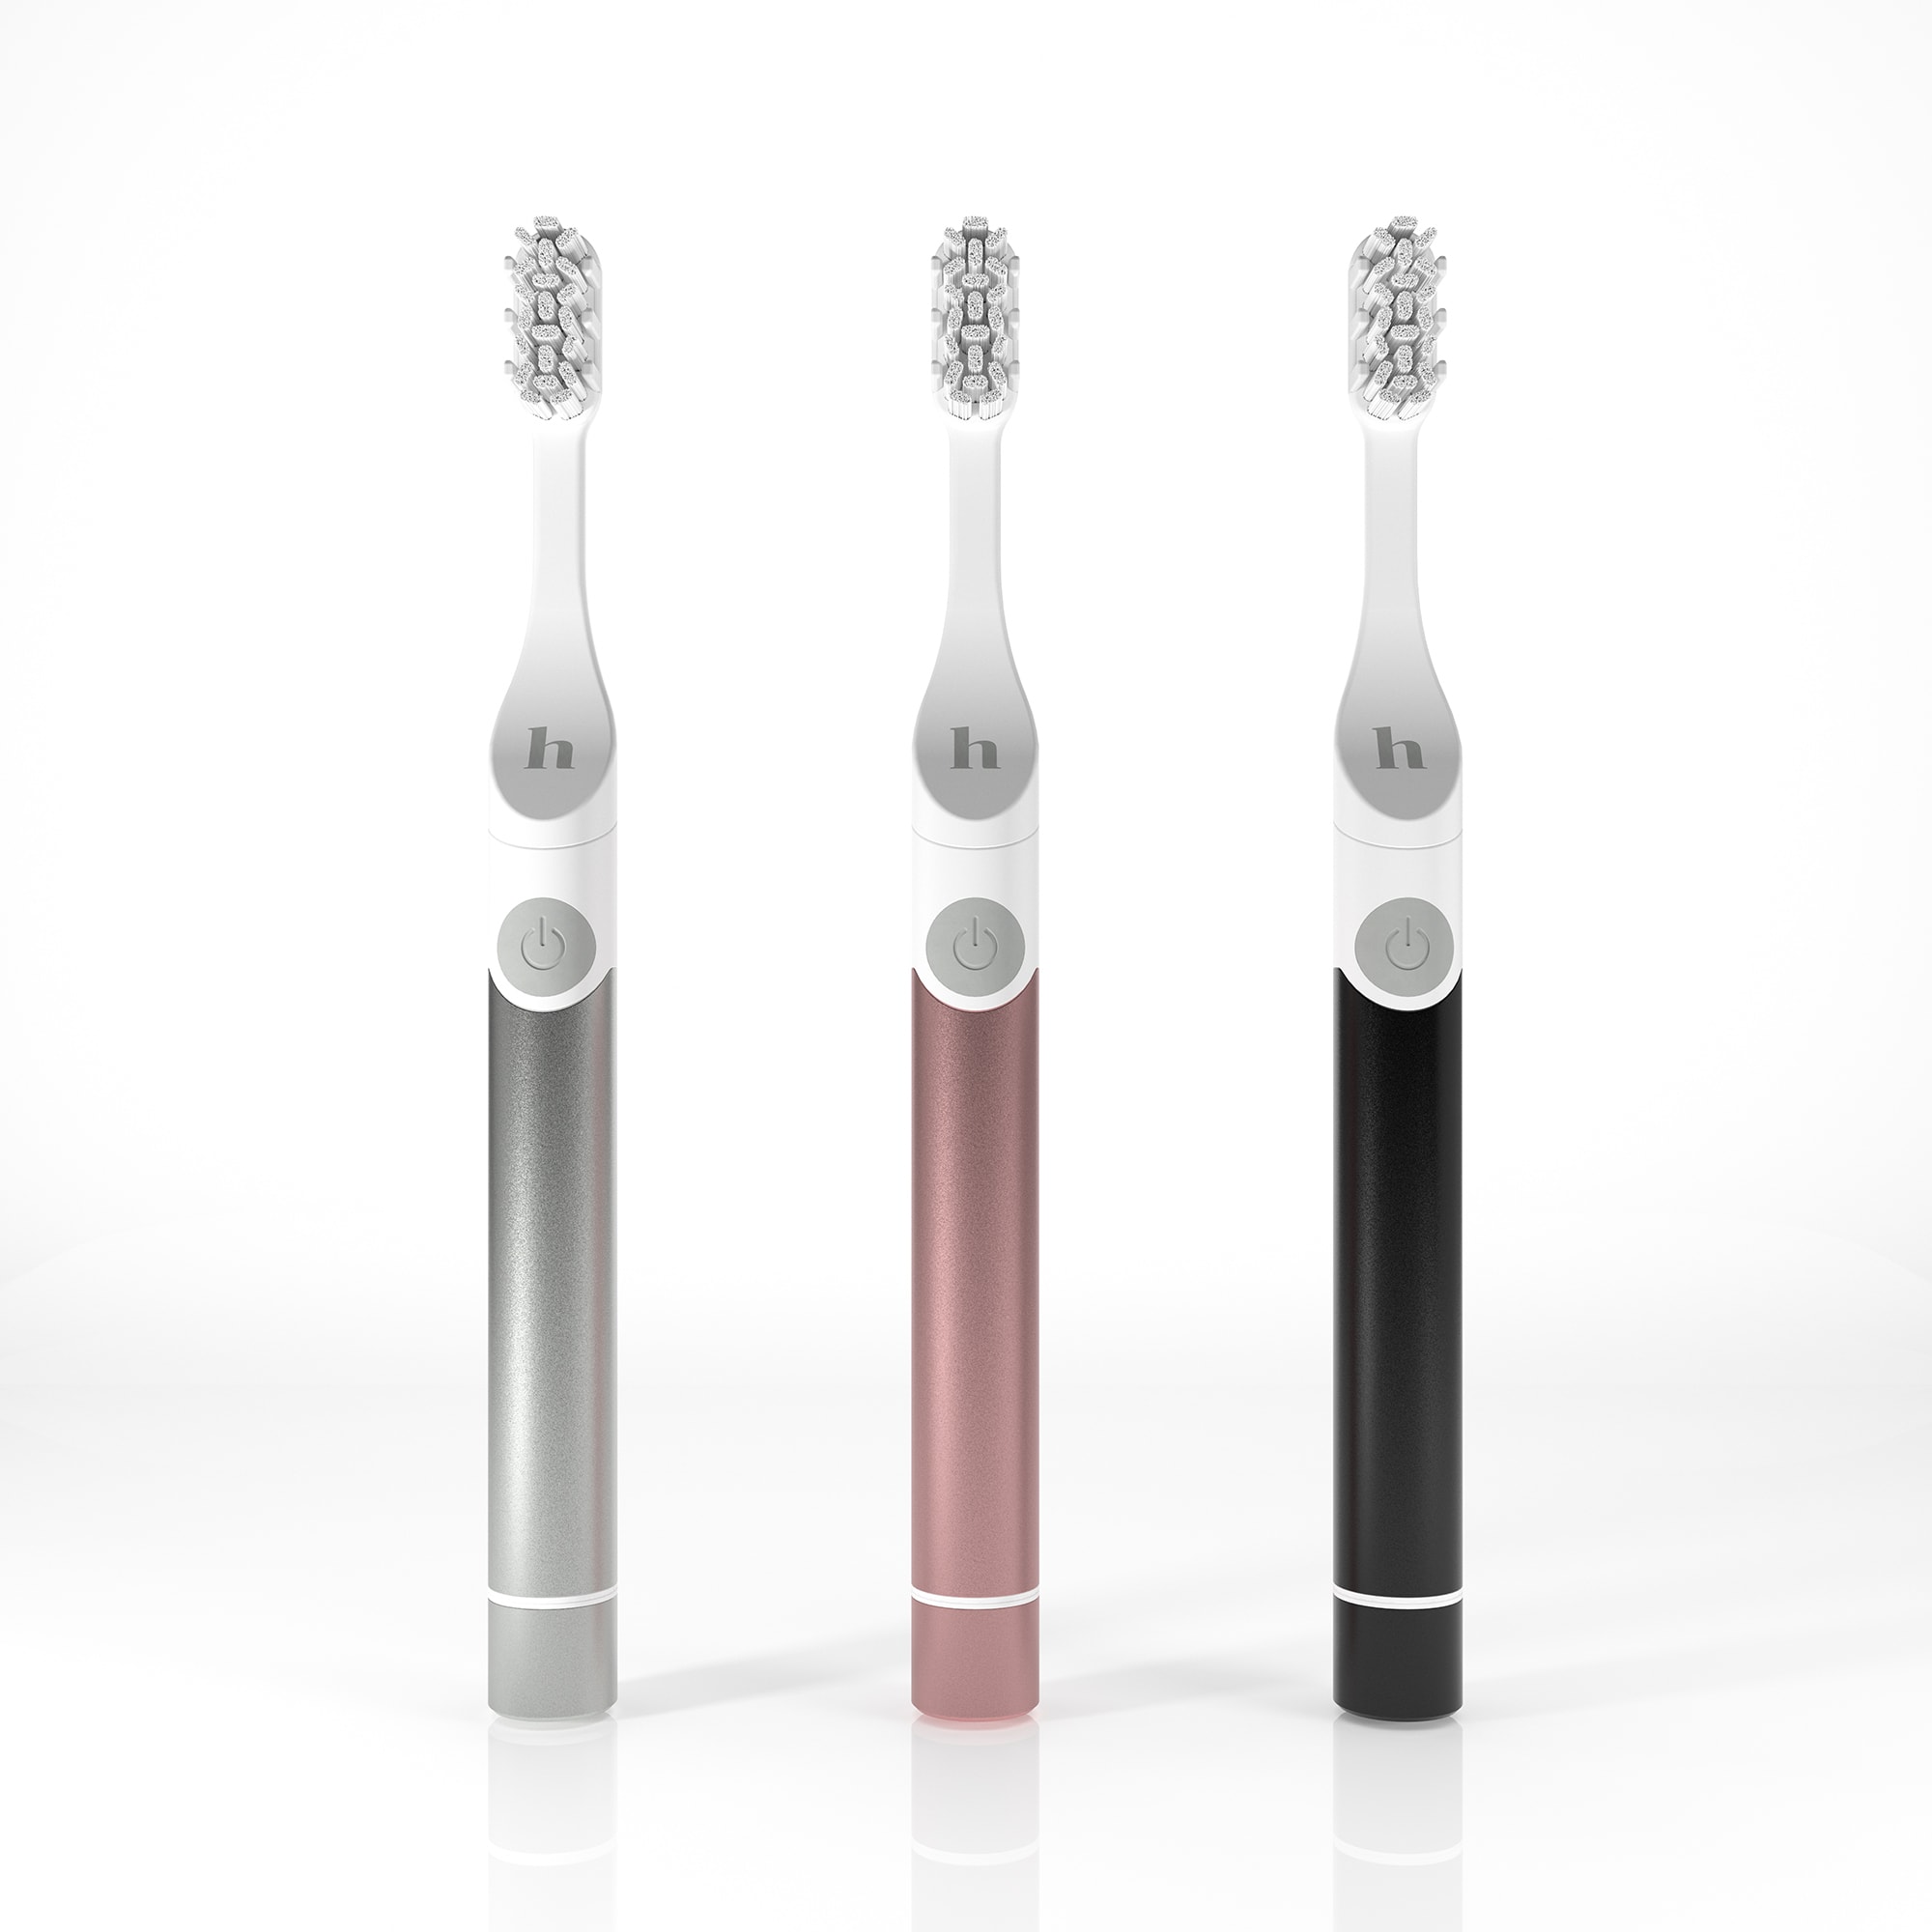 3D images of a modern toothbrush for web shop